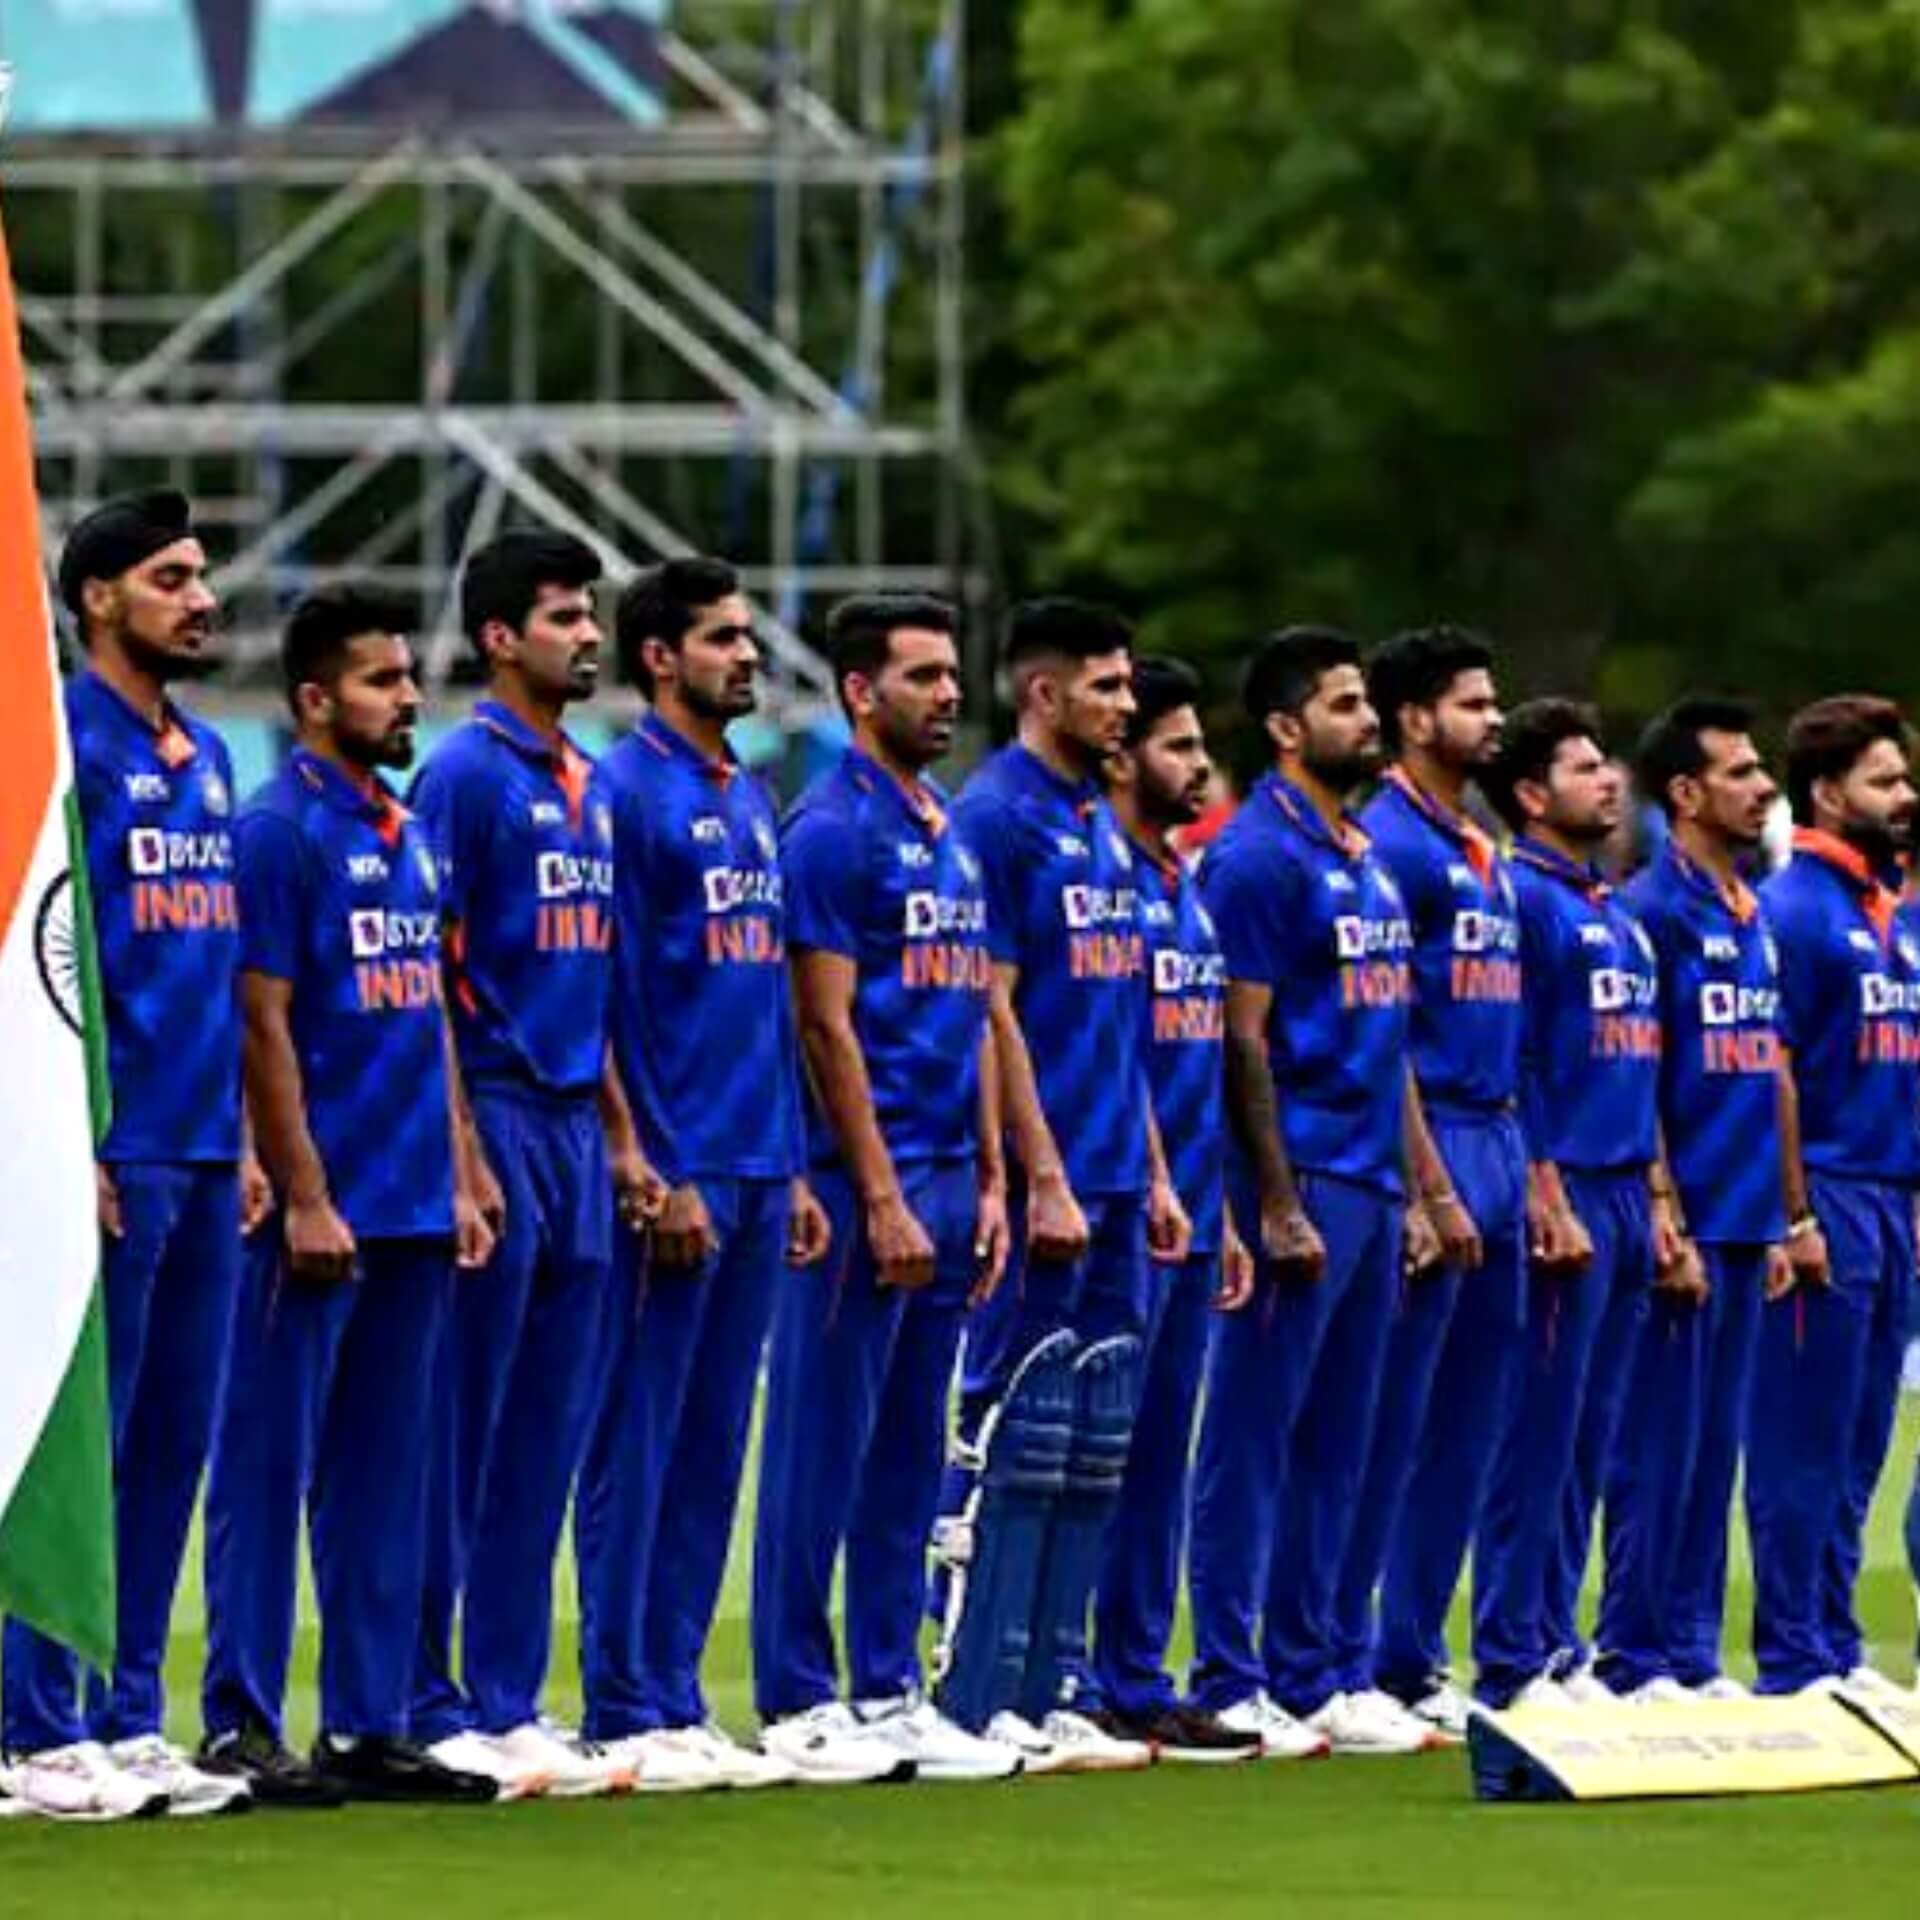 Indian Cricket Team Pics images hd for Whatsapp